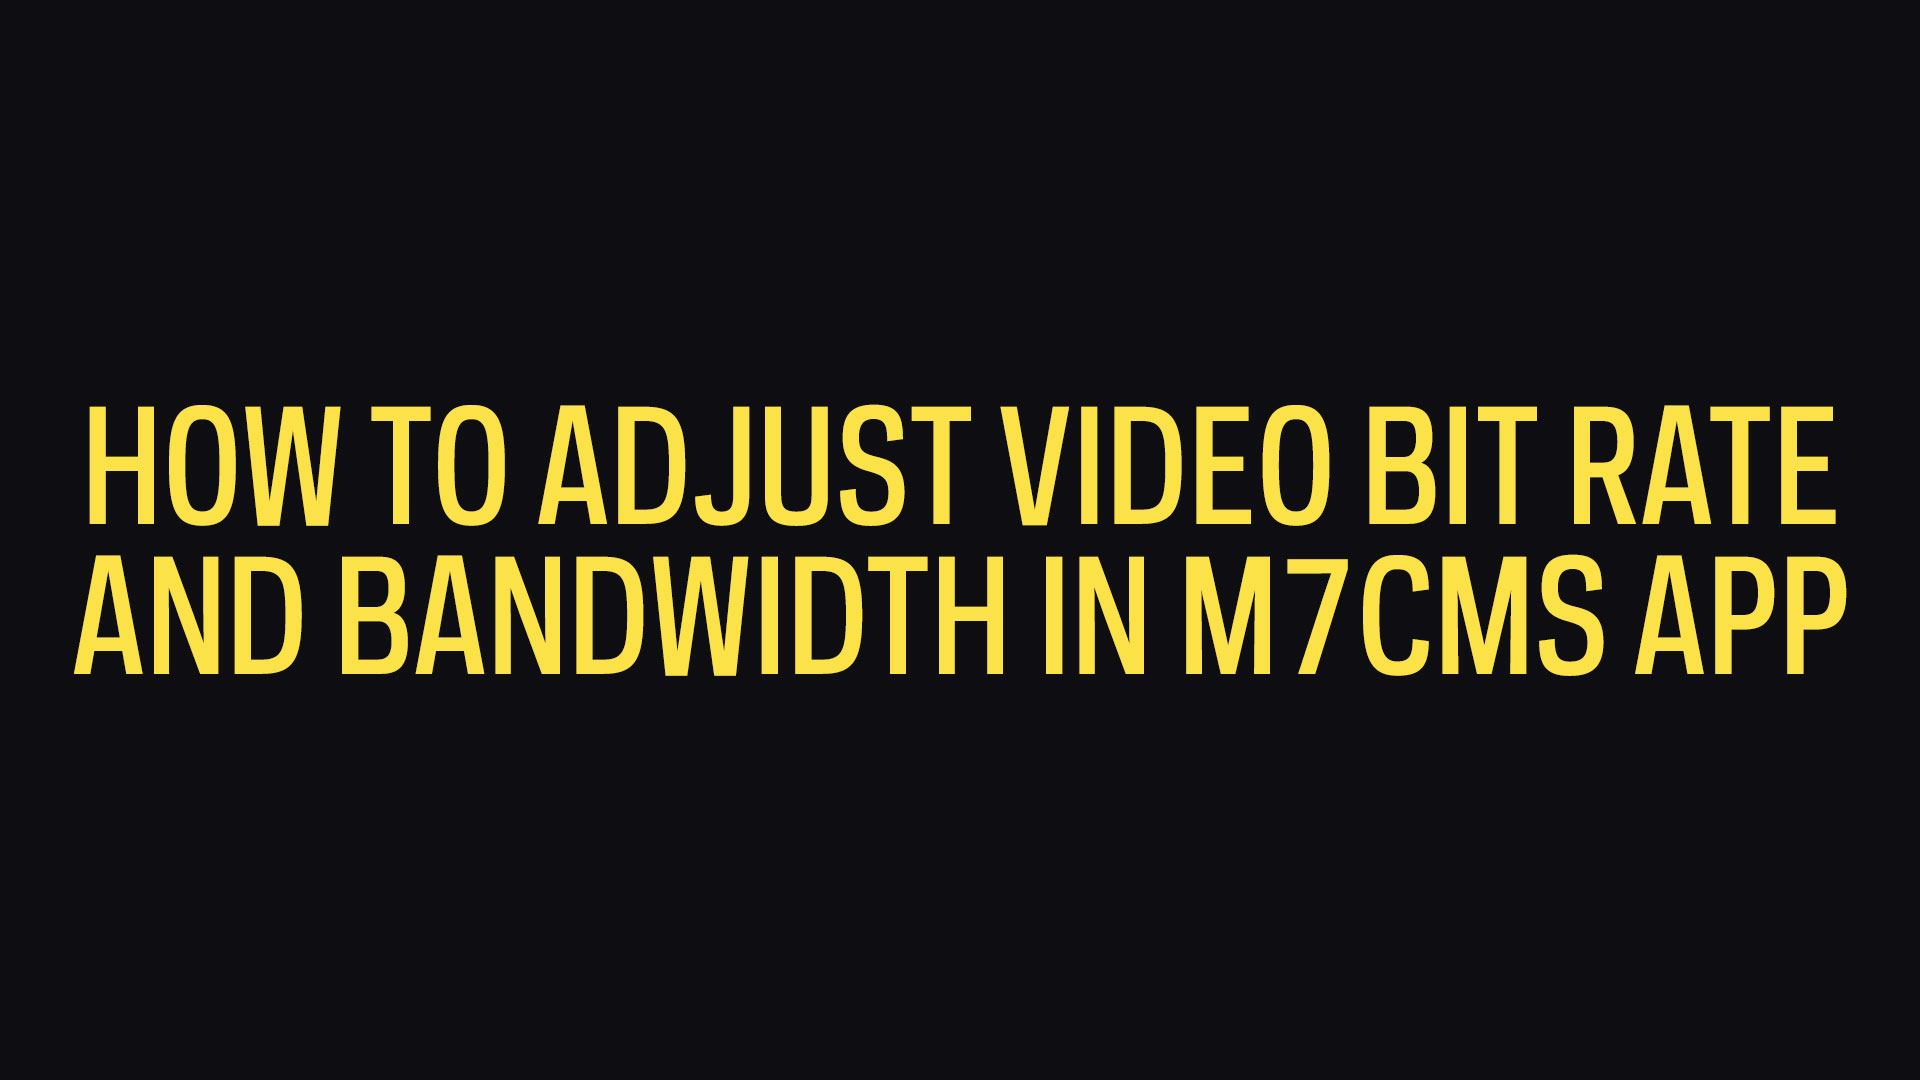 How To Adjust Video Streaming Bit Rate And Bandwidth in M7CMS